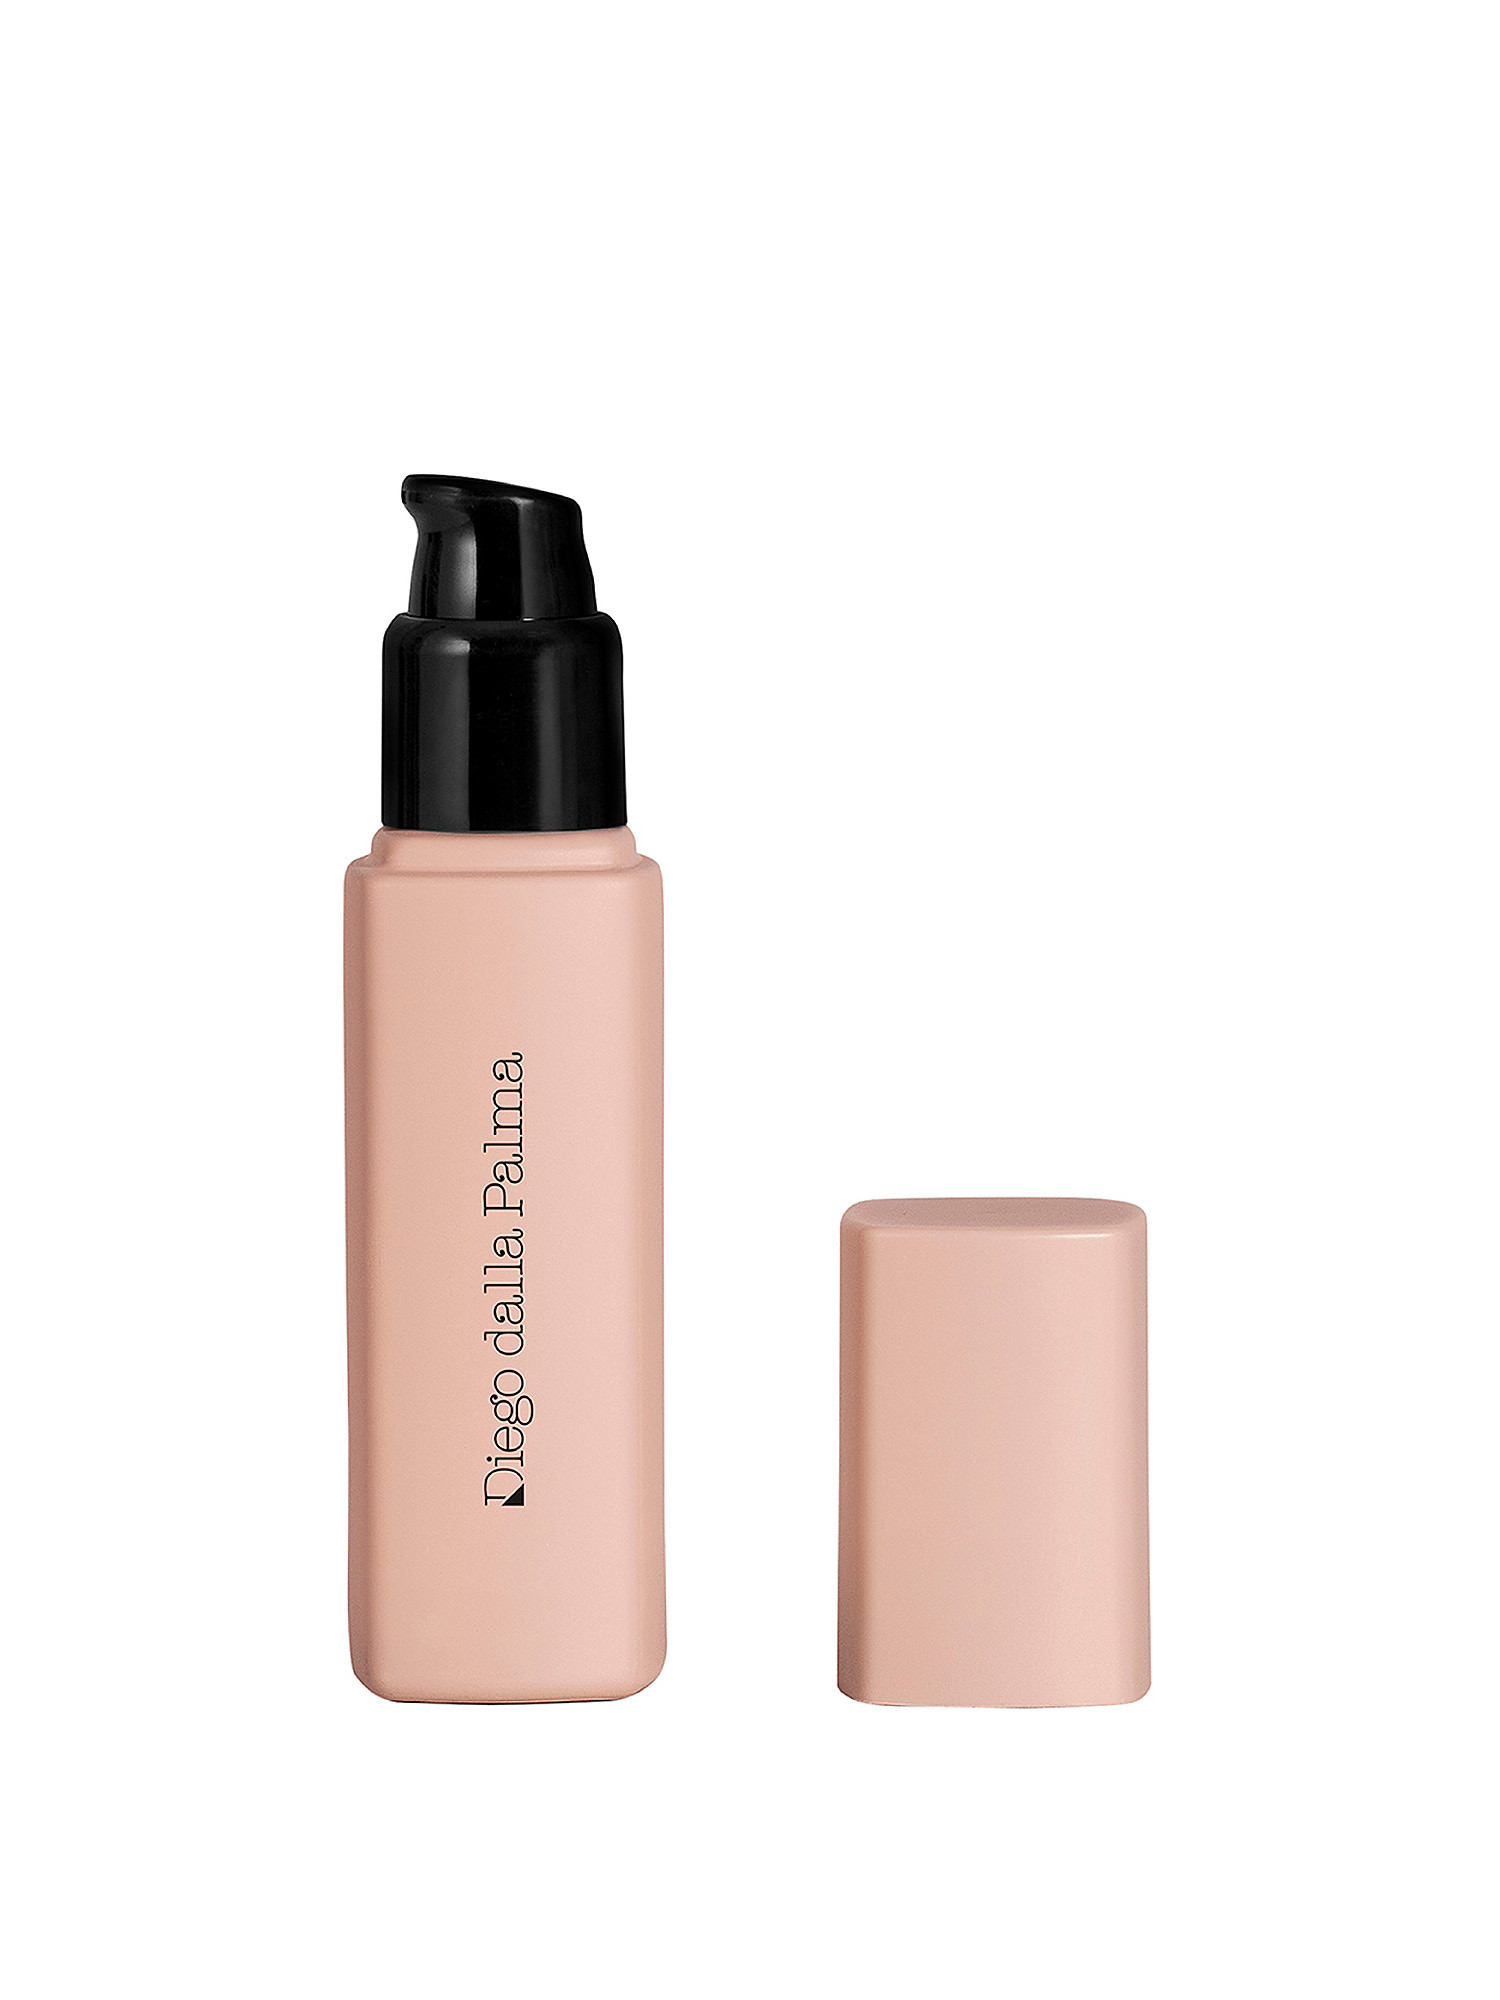 NUDISSIMO Naturally Matte Foundation - 248W, Copper Brown, large image number 0